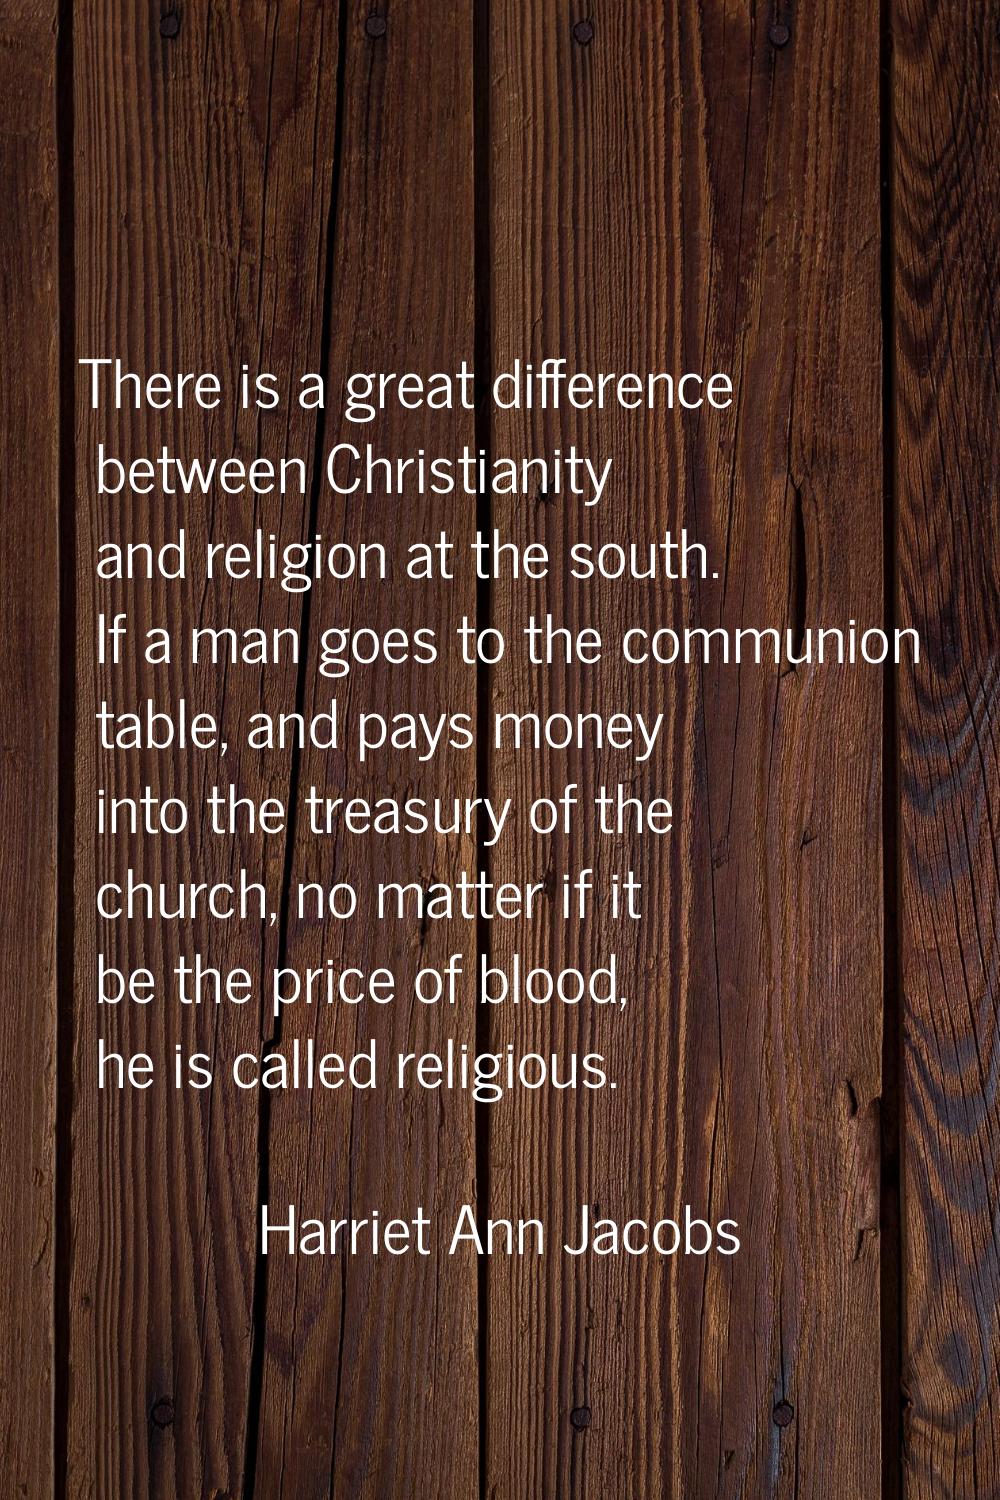 There is a great difference between Christianity and religion at the south. If a man goes to the co